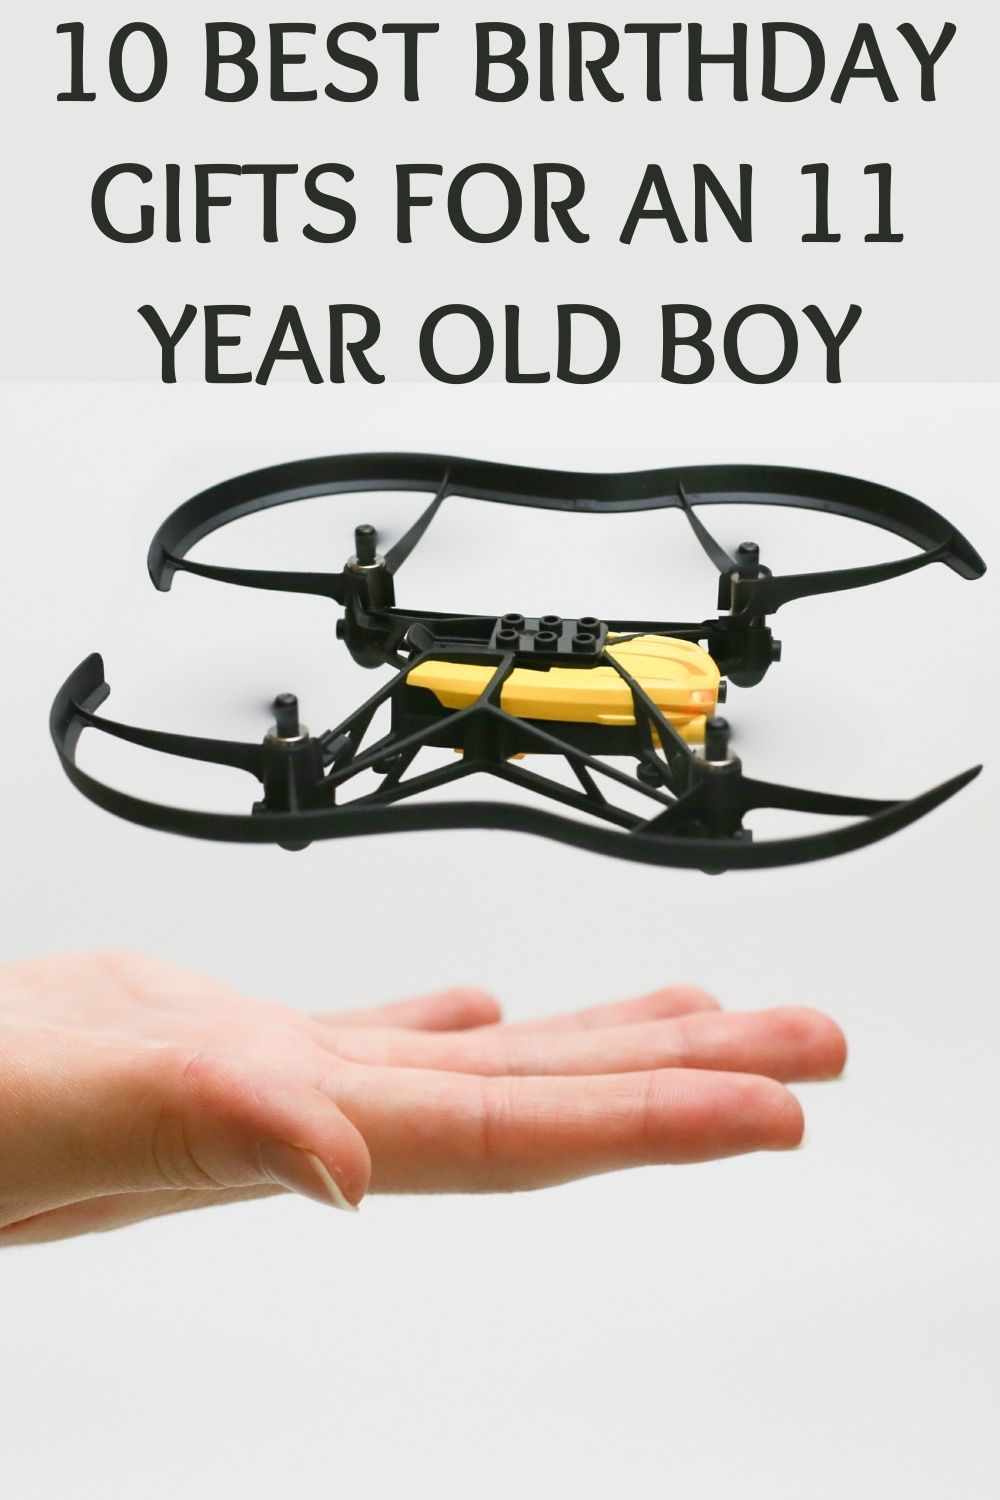 10 best birthday gifts for an 11 year old boy